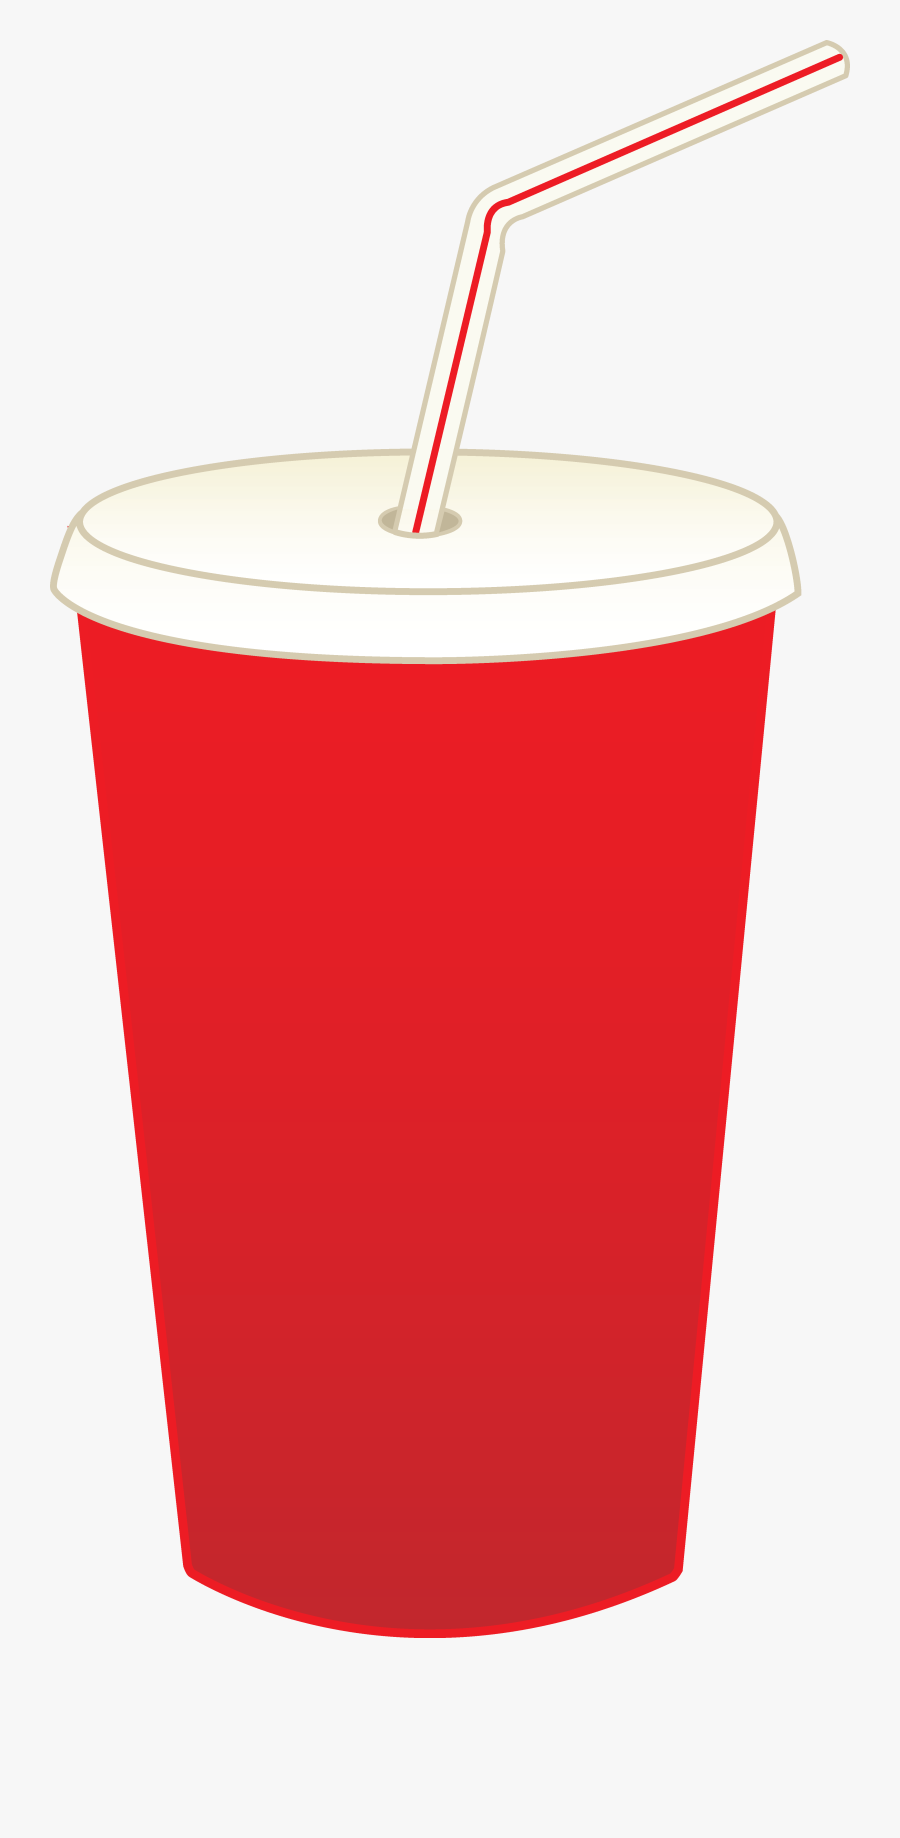 Soft Drinks Clipart - Soda Cup Clipart, Transparent Clipart